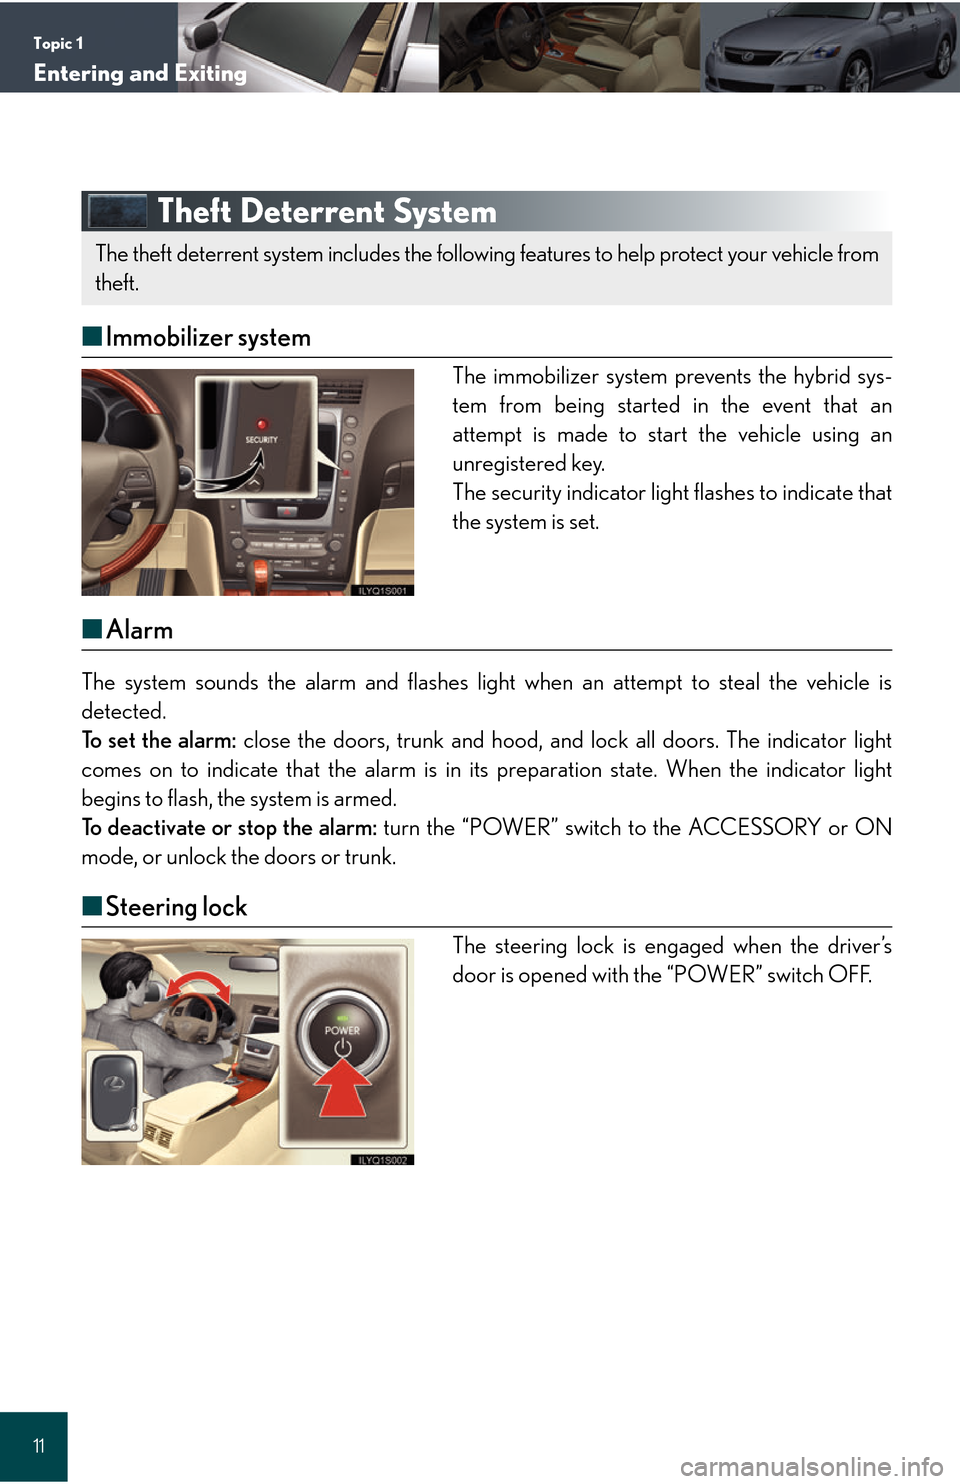 Lexus GS450h 2008  Using the audio system / LEXUS 2008 GS450H QUICK GUIDE  (OM30B13U) User Guide Topic 1
Entering and Exiting
11
Theft Deterrent System
■Immobilizer system
The immobilizer system prevents the hybrid sys-
tem from being started in the event that an
attempt is made to start the ve